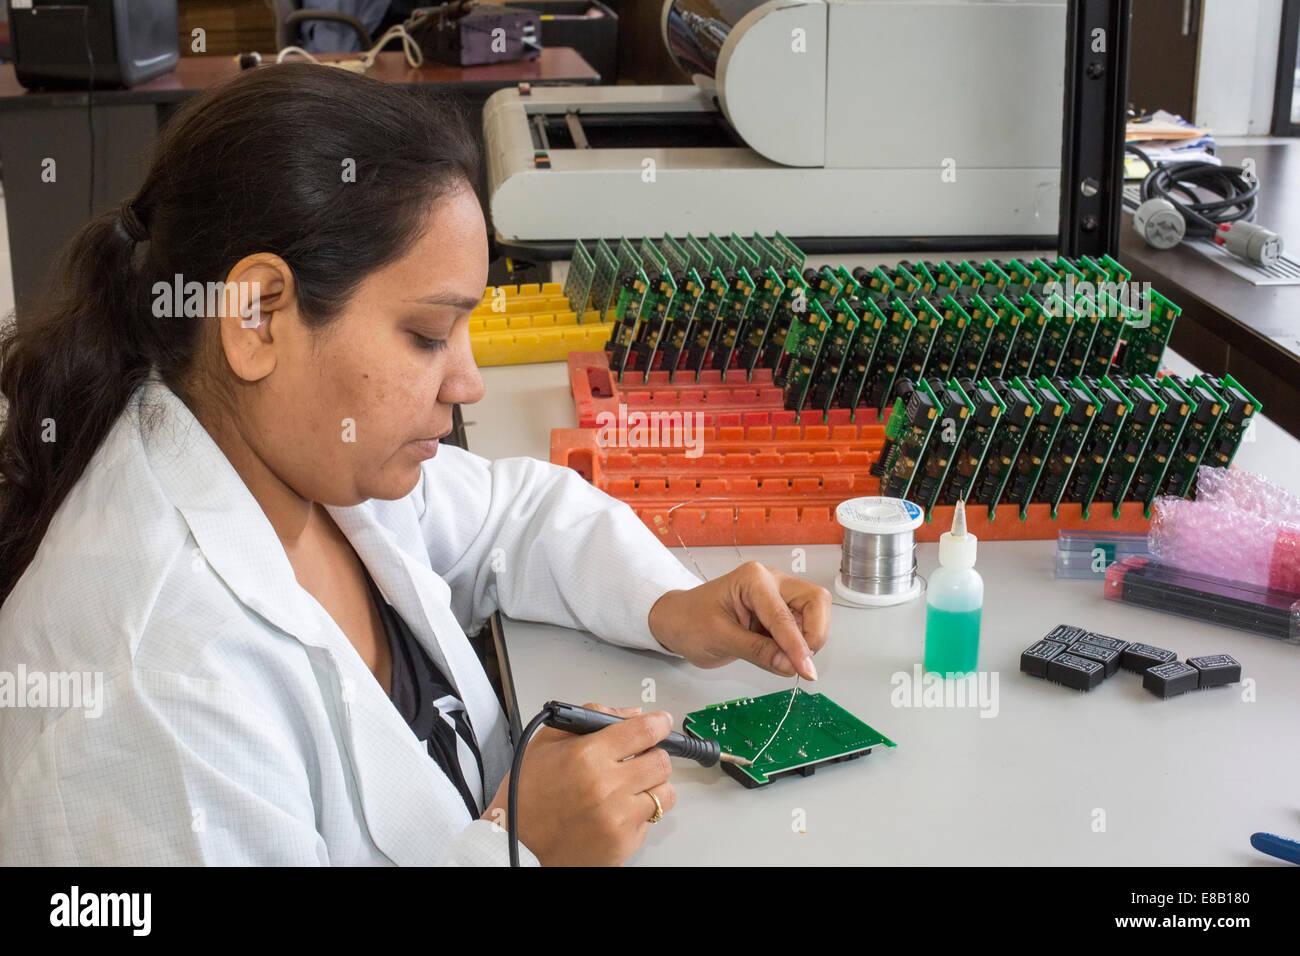 Detroit, Michigan - A worker for A123 Systems assembles circuit board for unmanned aerial vehicles (drones). Stock Photo